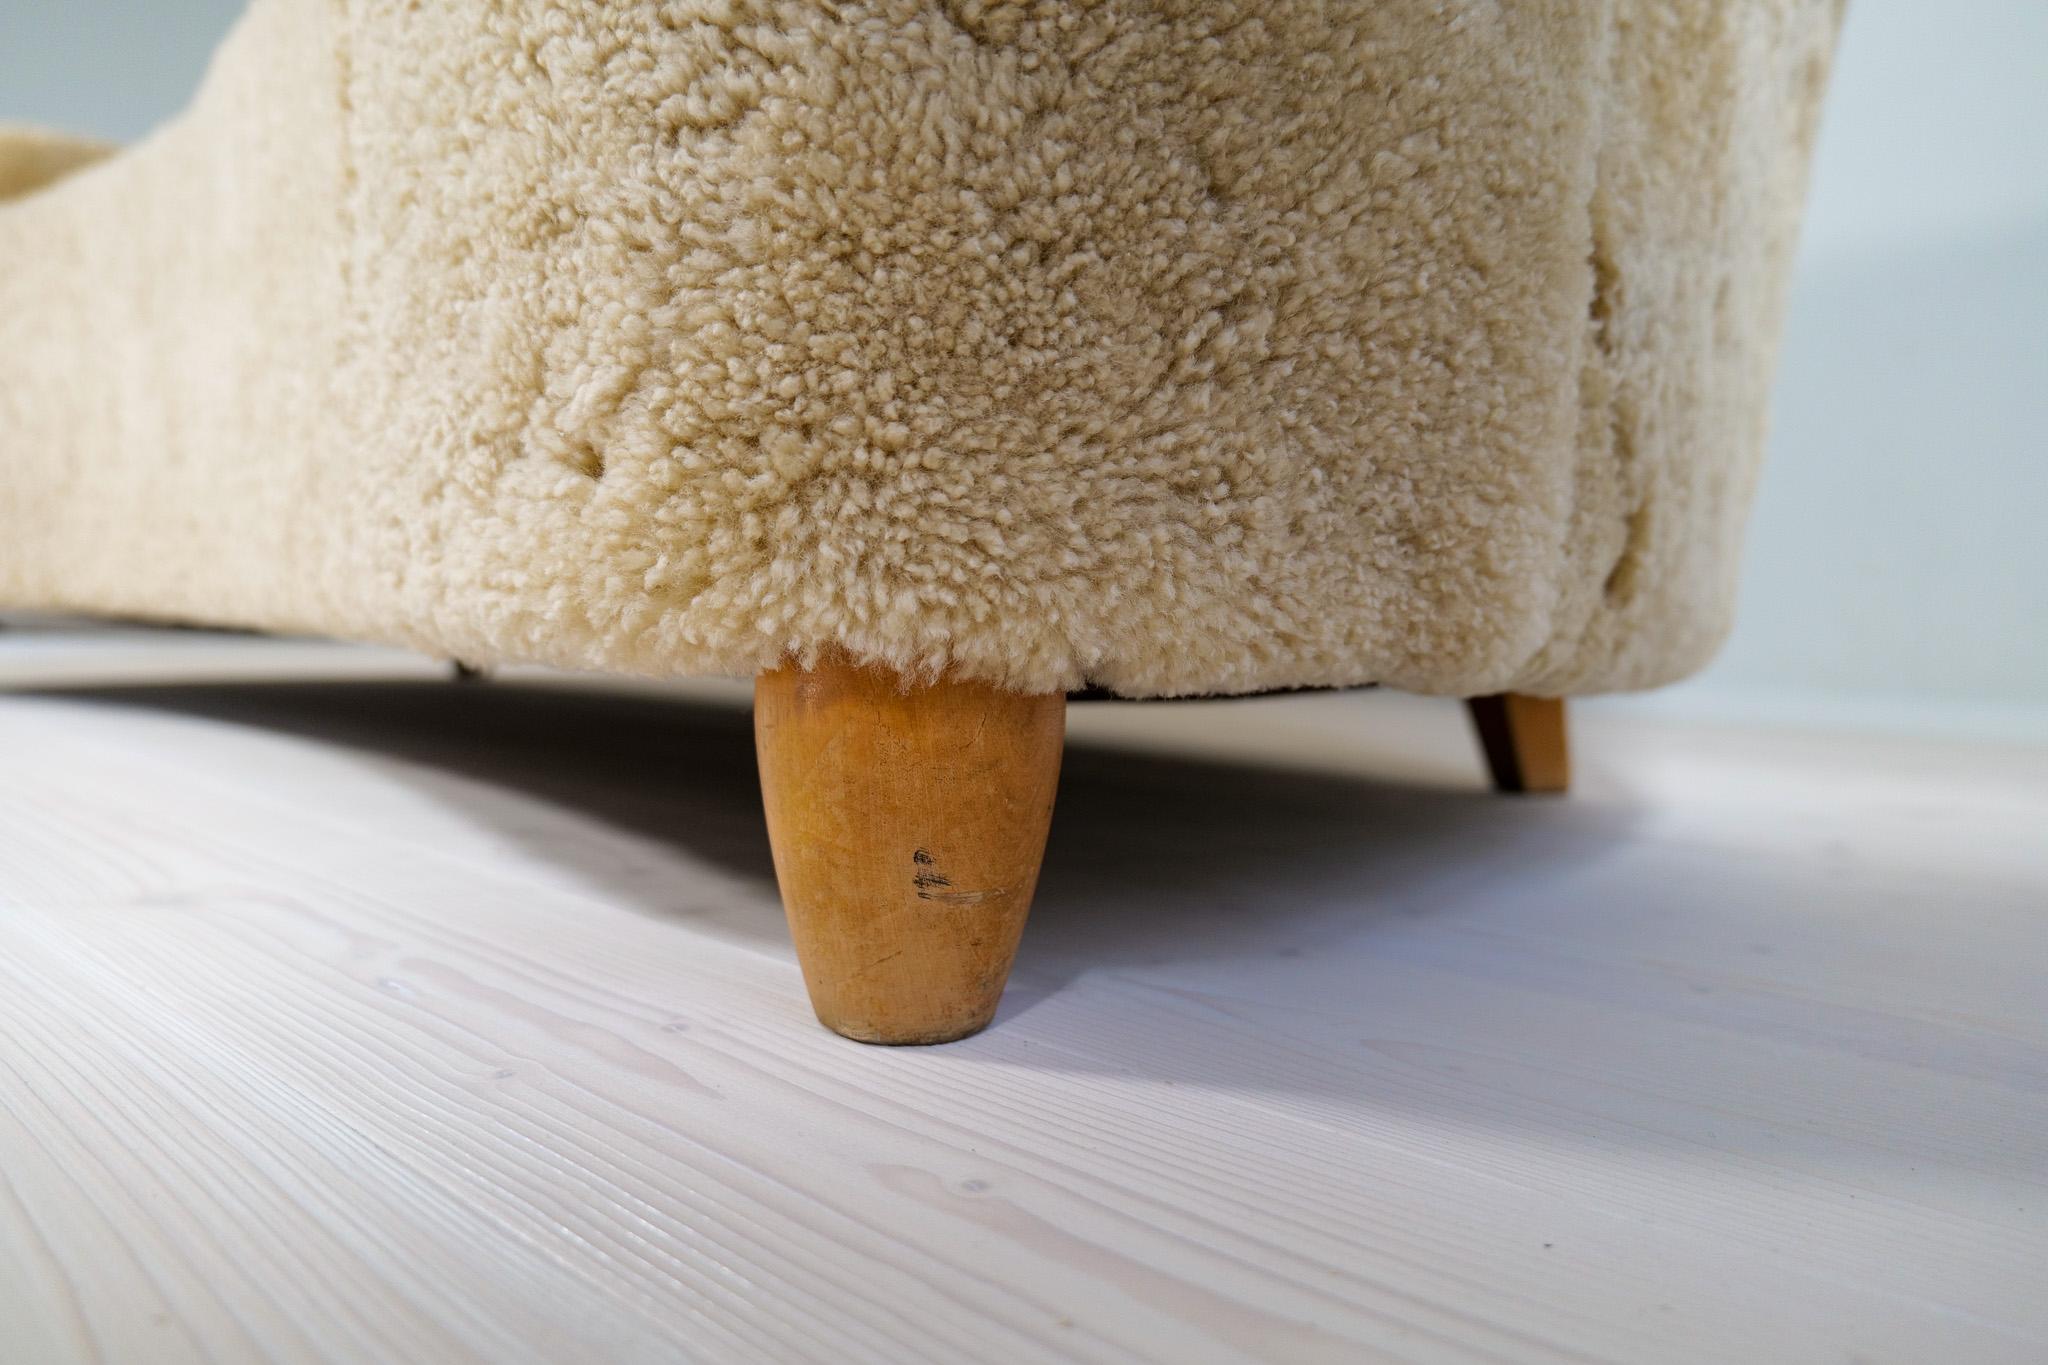 Midcentury Sculptrual Sheepskin/Shearling Sofa in Manors of Marta Blomstedt 3